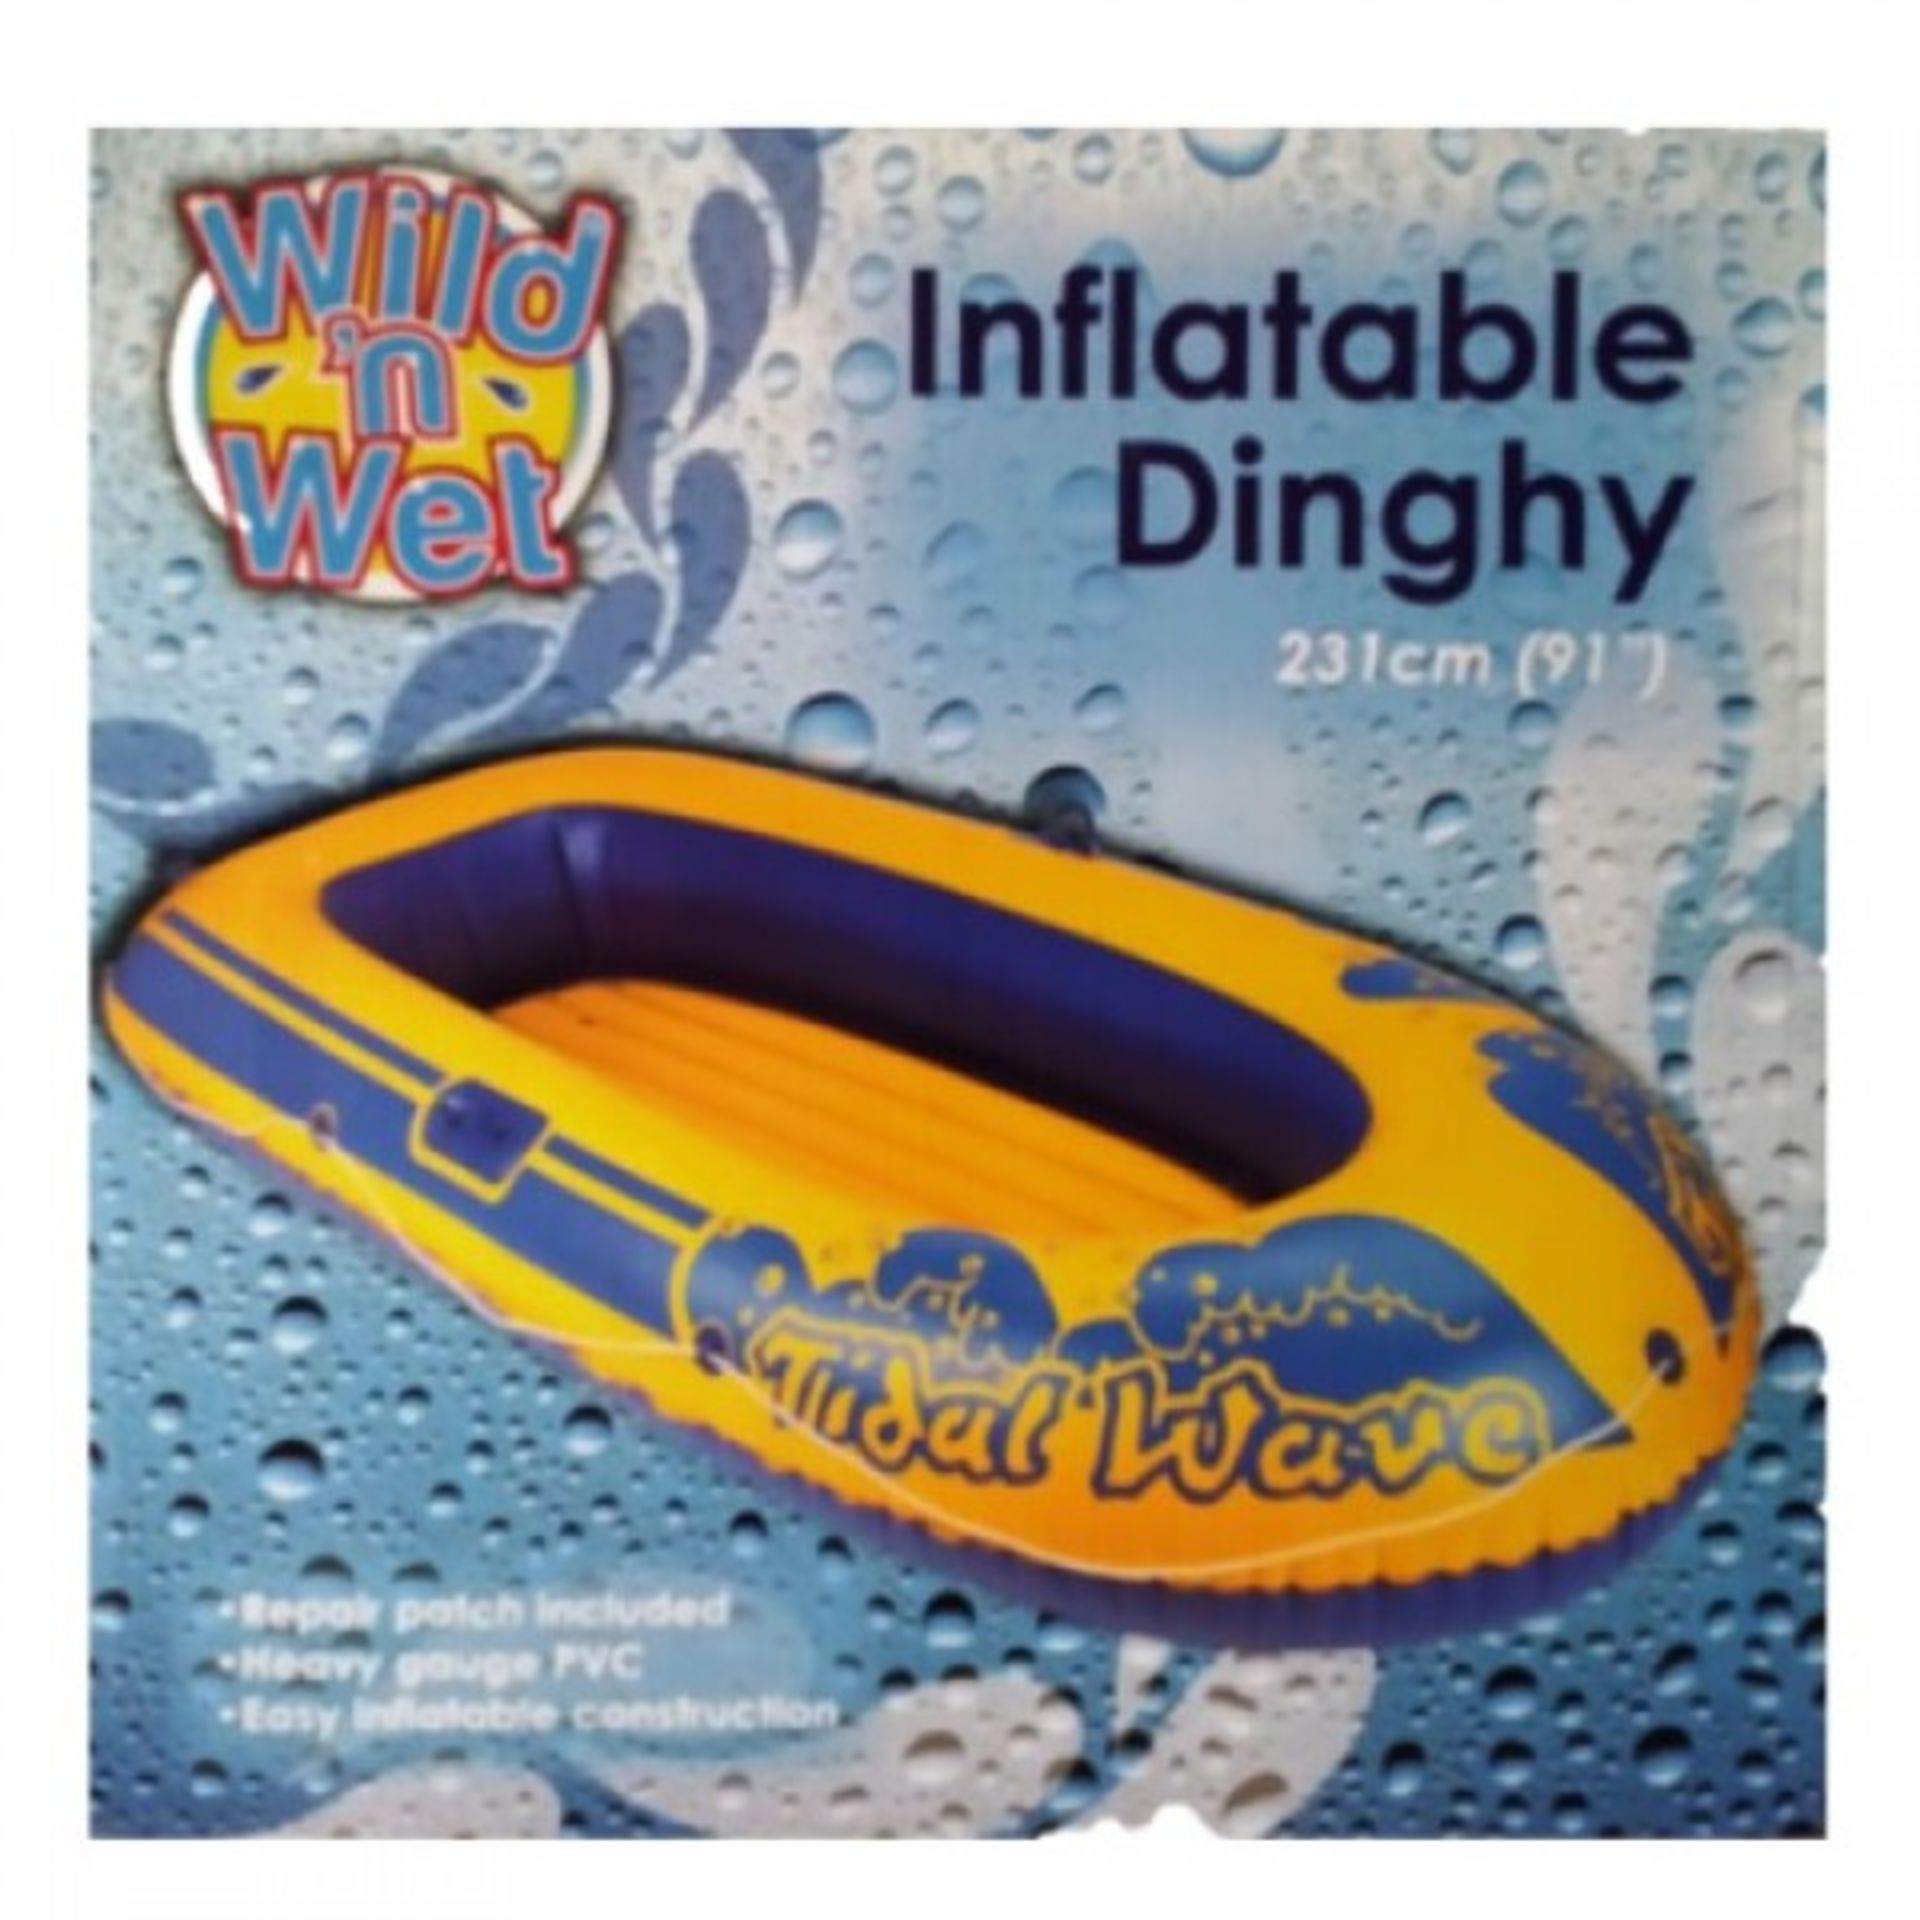 V Brand New 91" (231 cm) 3 Person Inflatable Dinghy Made from Heavy Gauge PVC - Easy Inflate - - Image 3 of 4